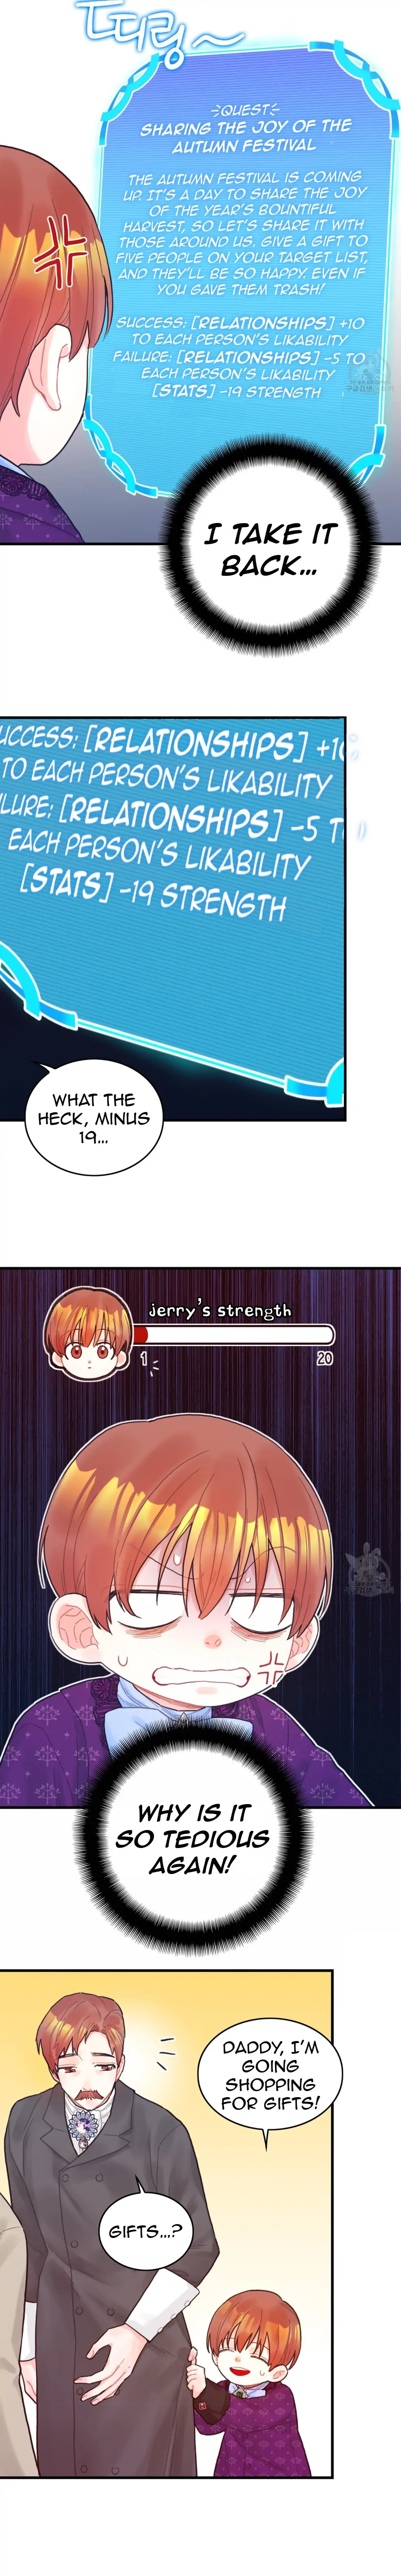 To deny the route chapter 7